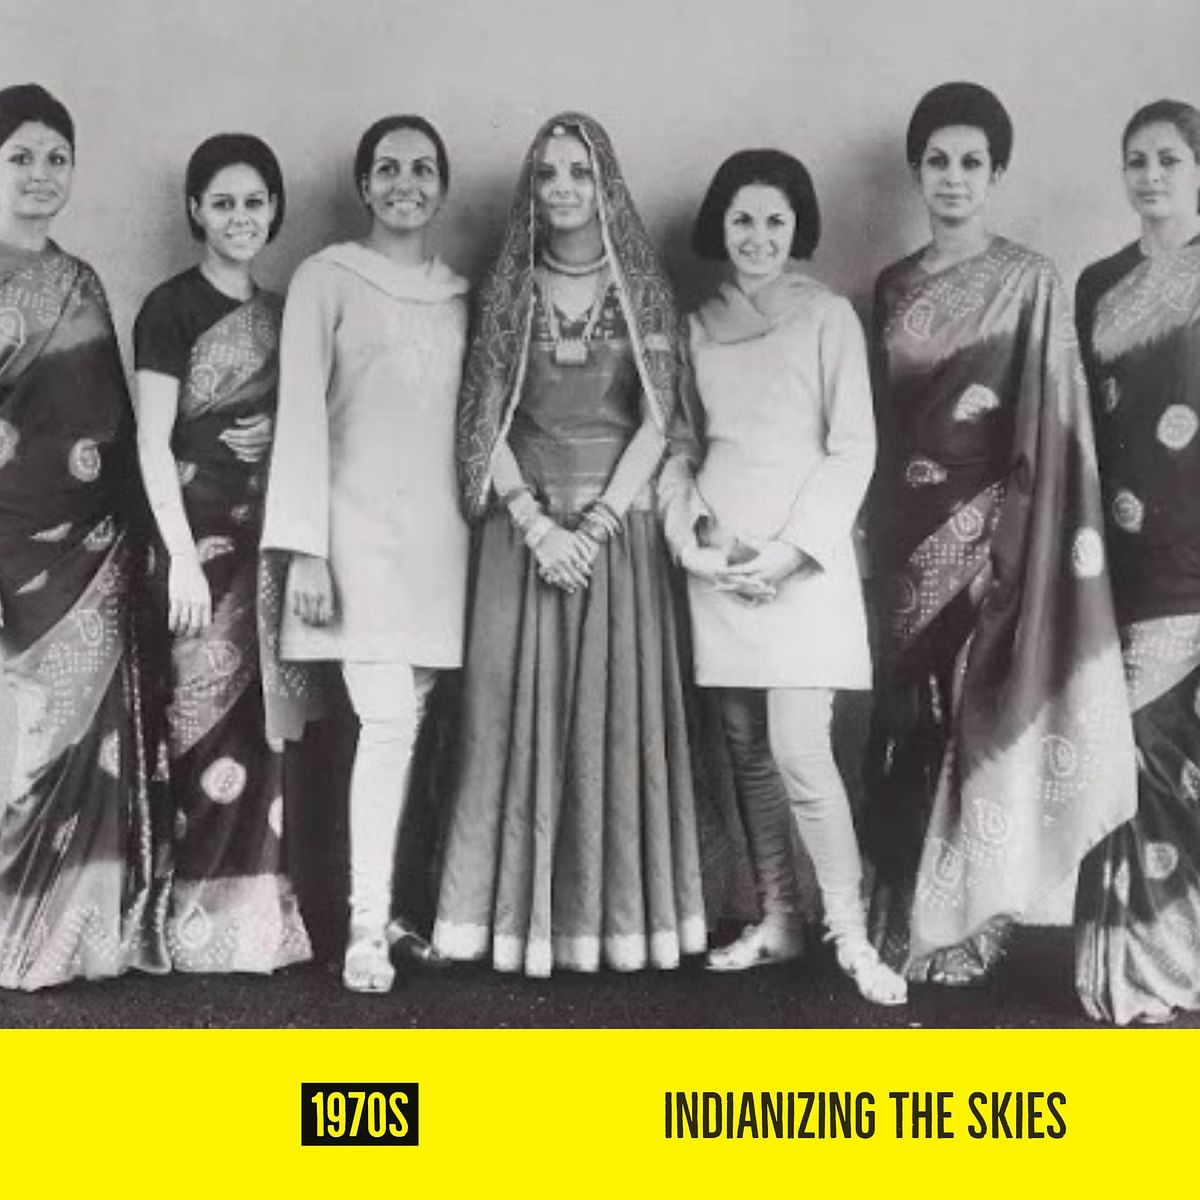 From skirts to saris to skirts again: the many changes that air hostess uniforms underwent over the decades